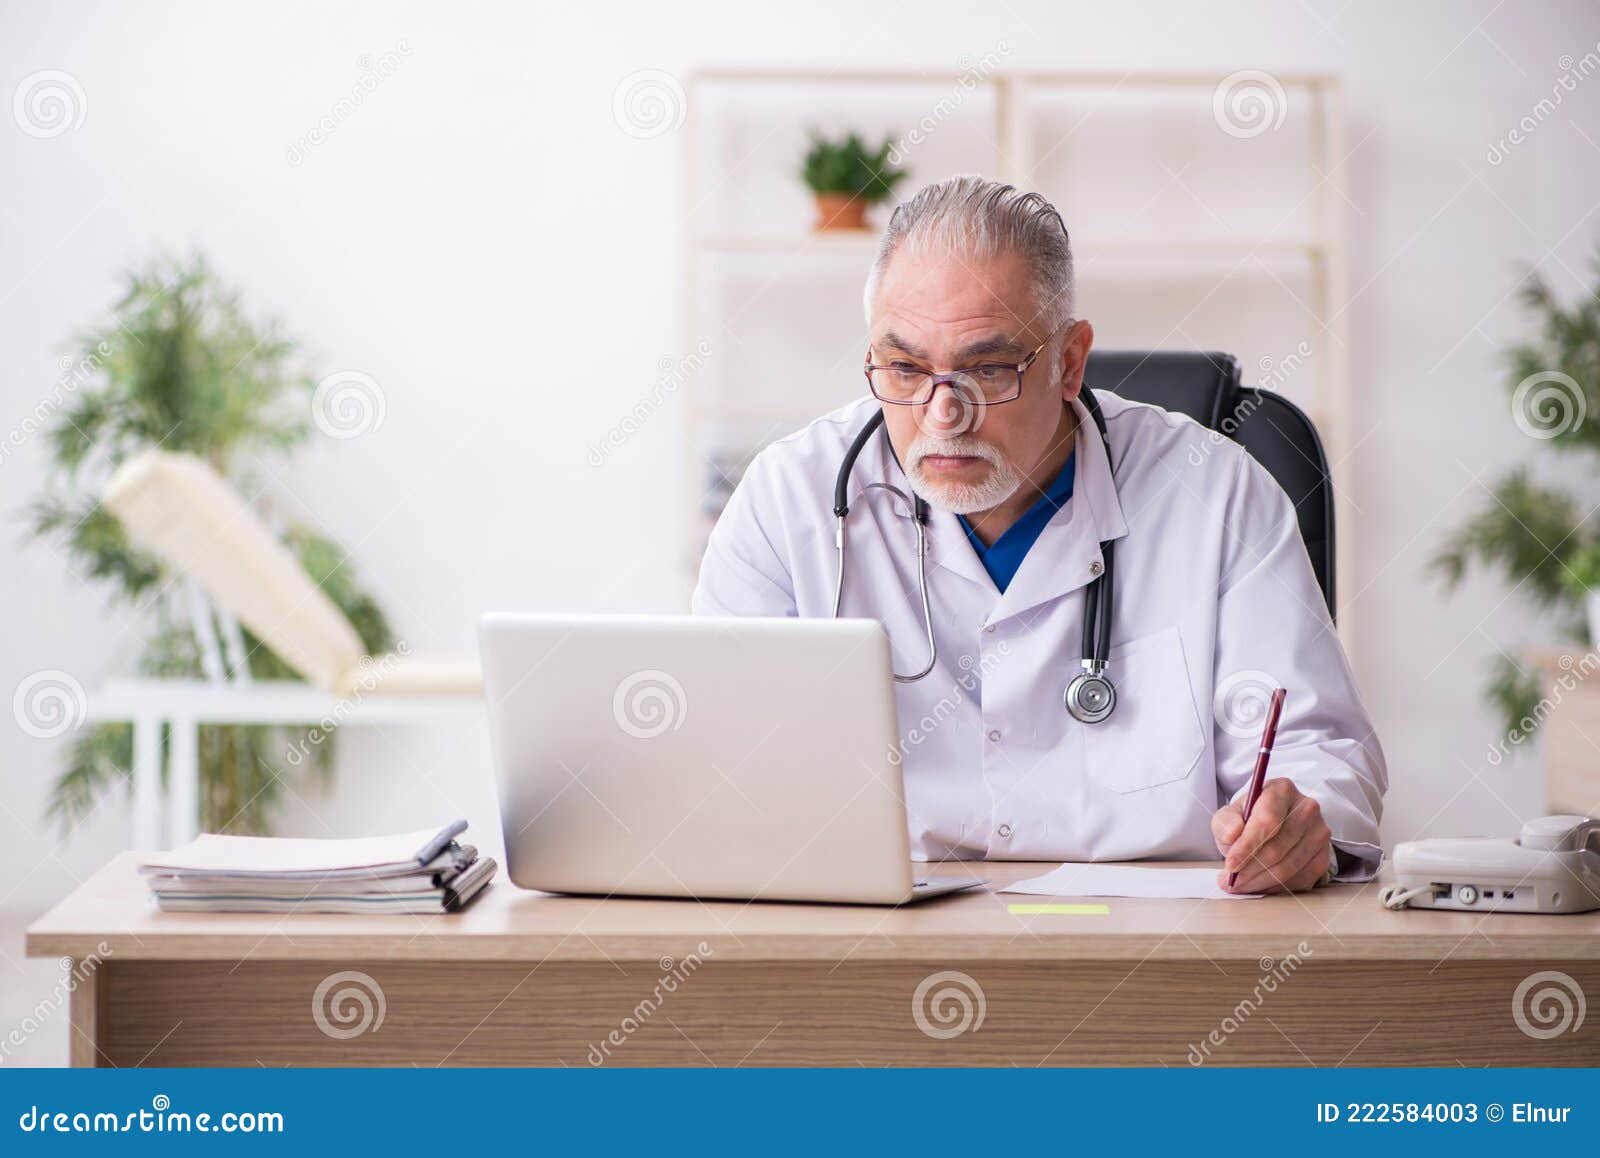 Old Male Doctor Working in the Clinic Stock Image - Image of specialist ...